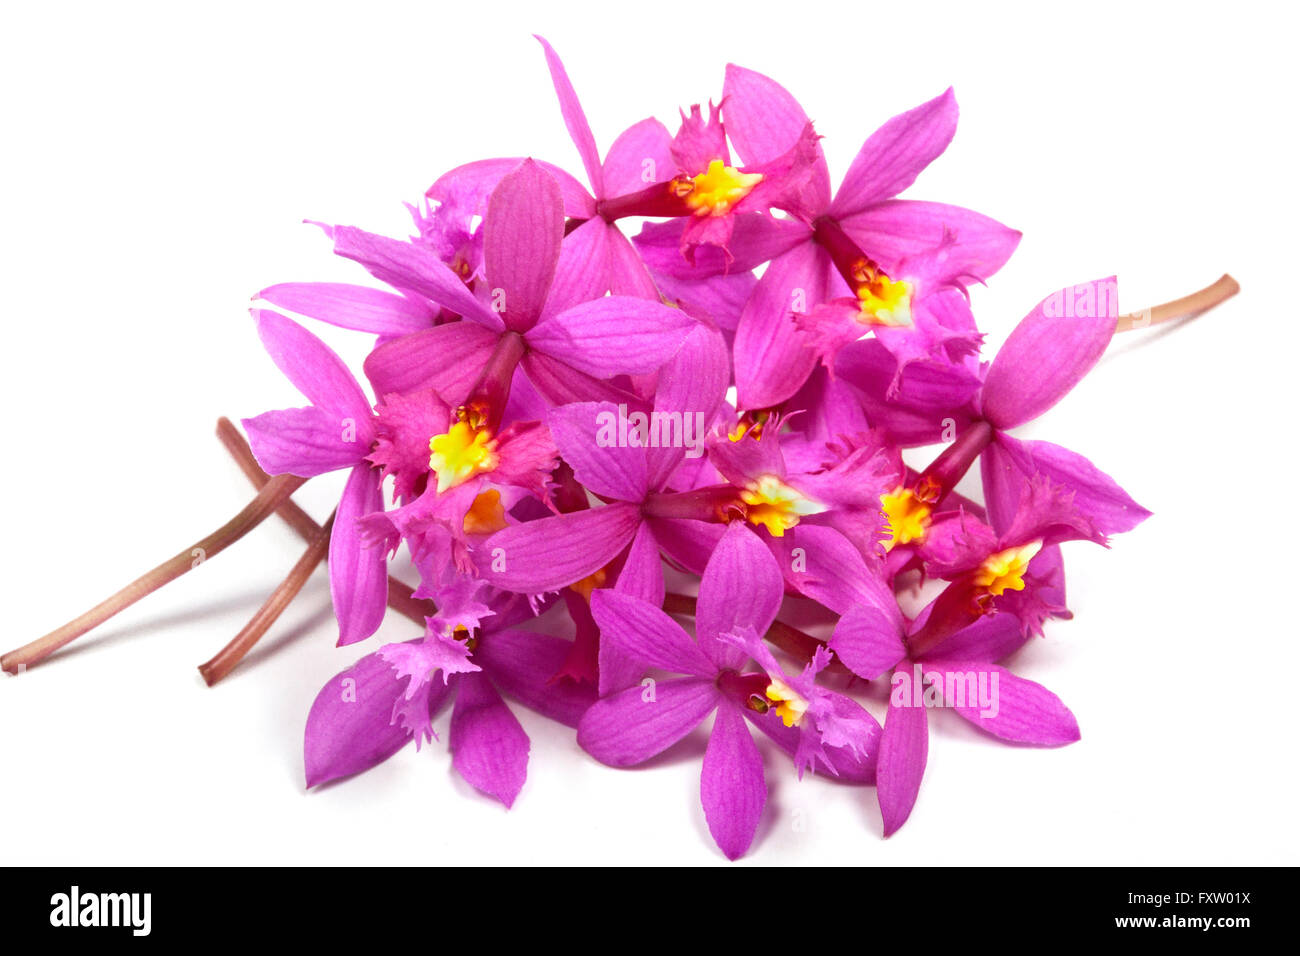 Pile of tiny pink epidendrum orchids with yellow centers on white Stock Photo